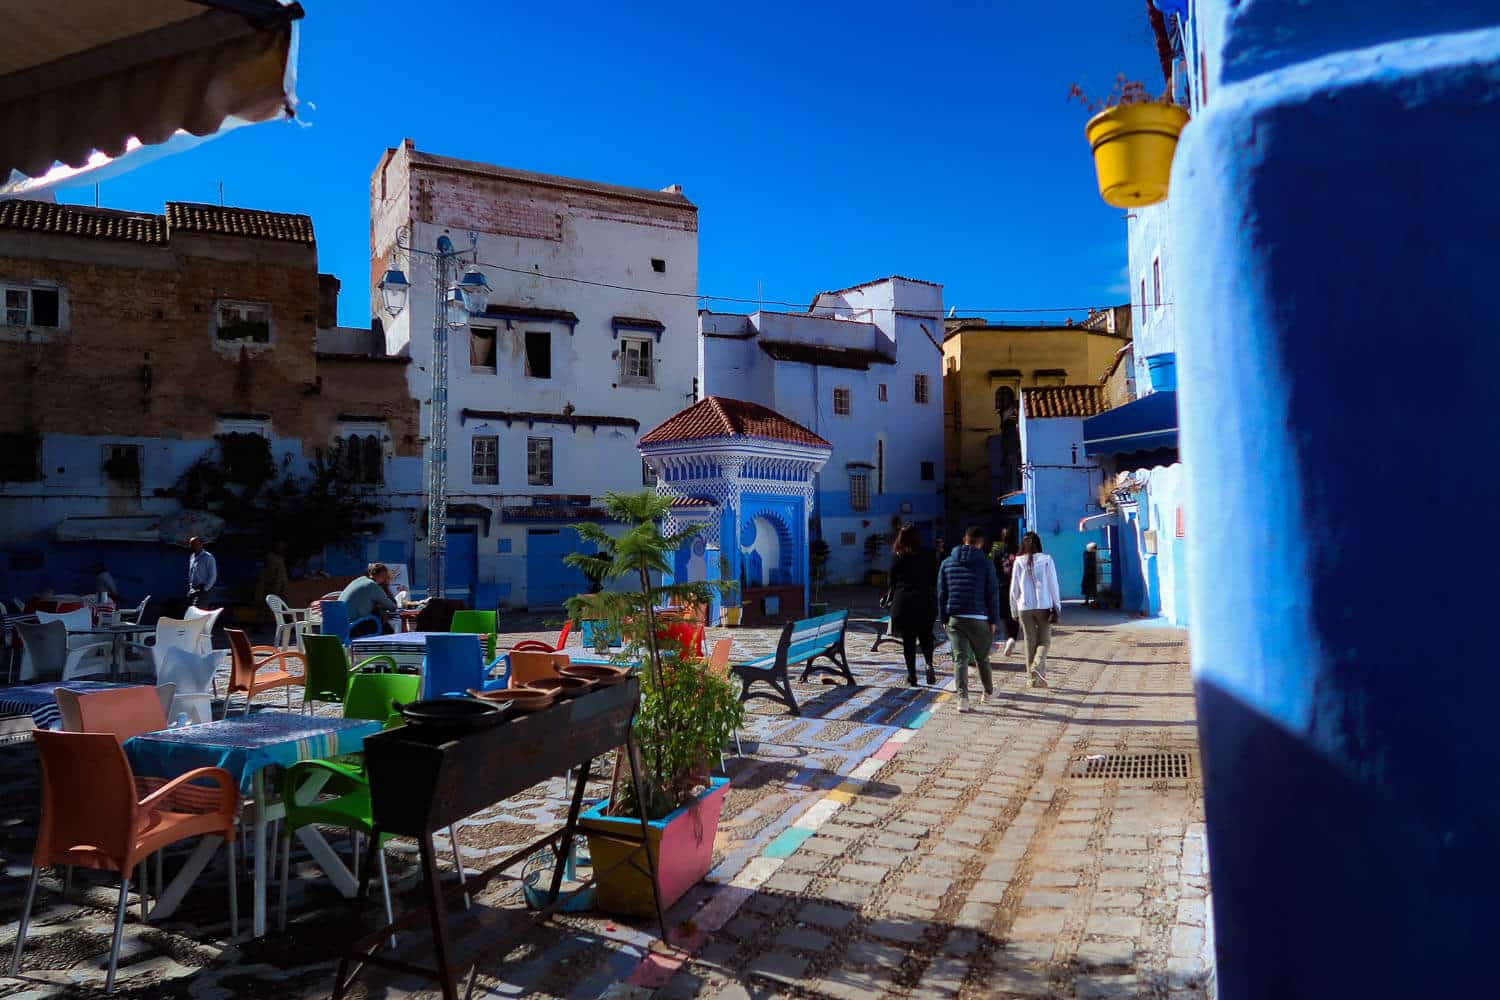 Chefchouen, the blue city in Morocco